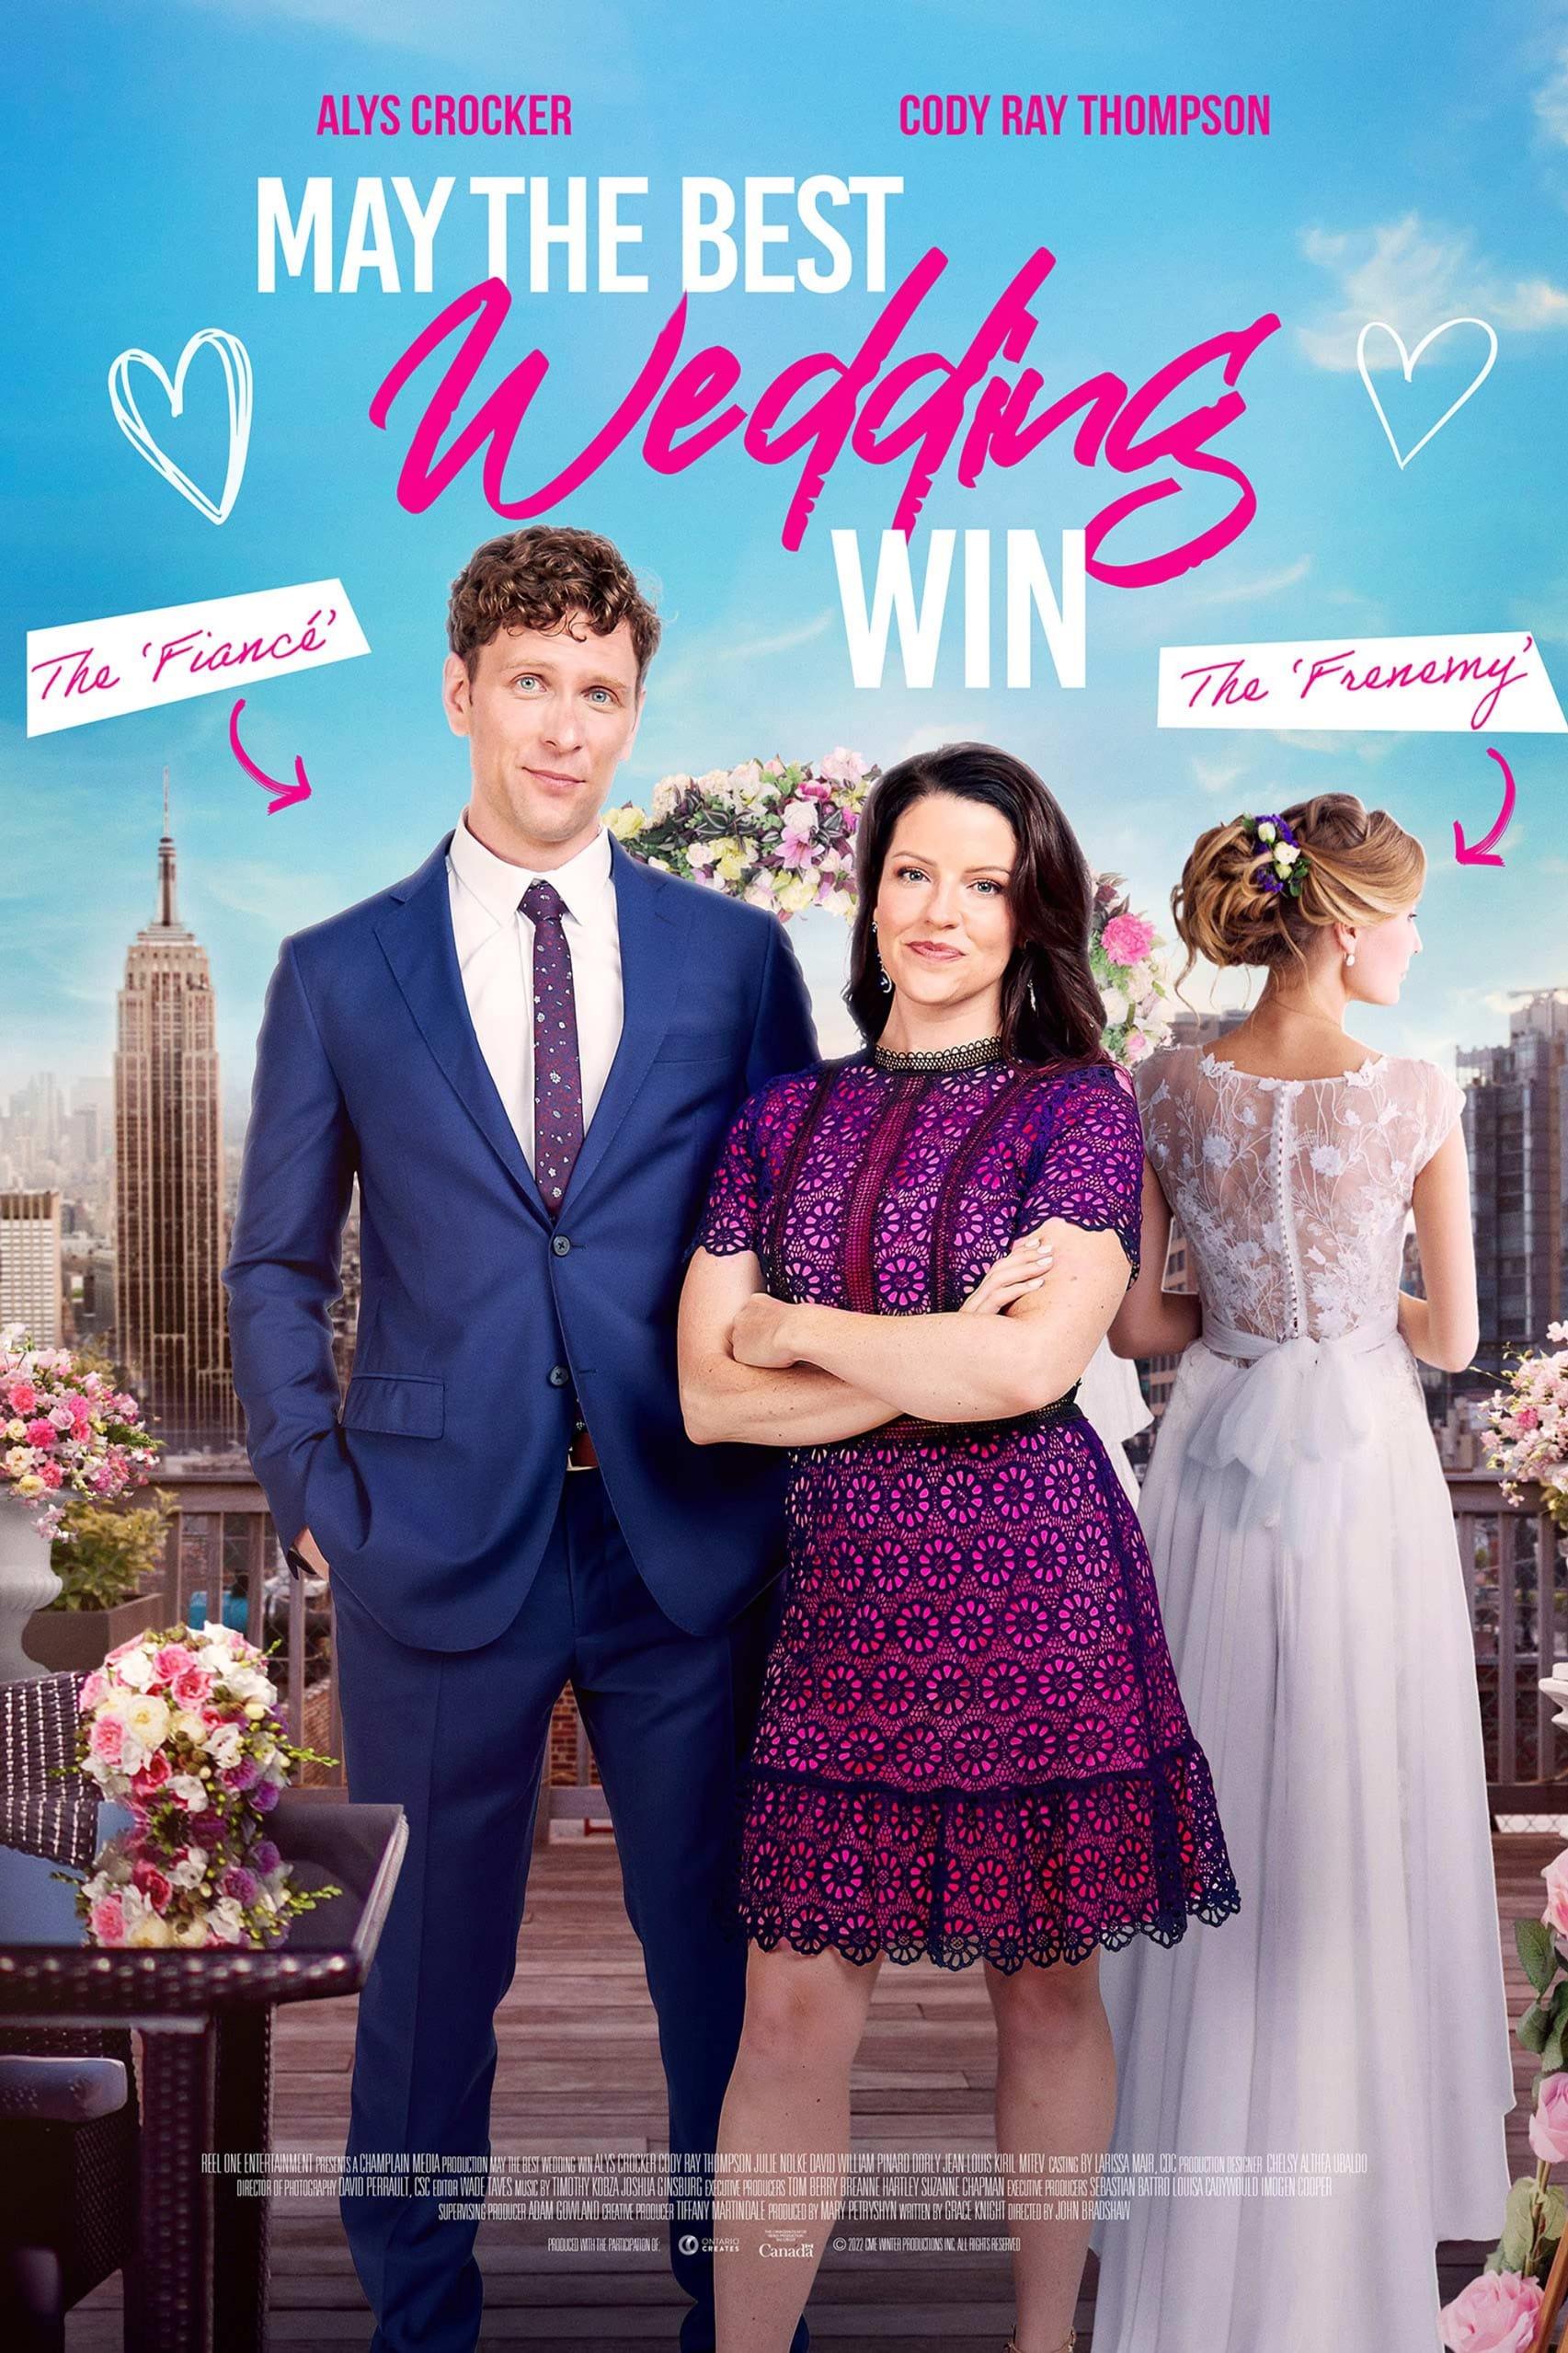 May the Best Wedding Win poster